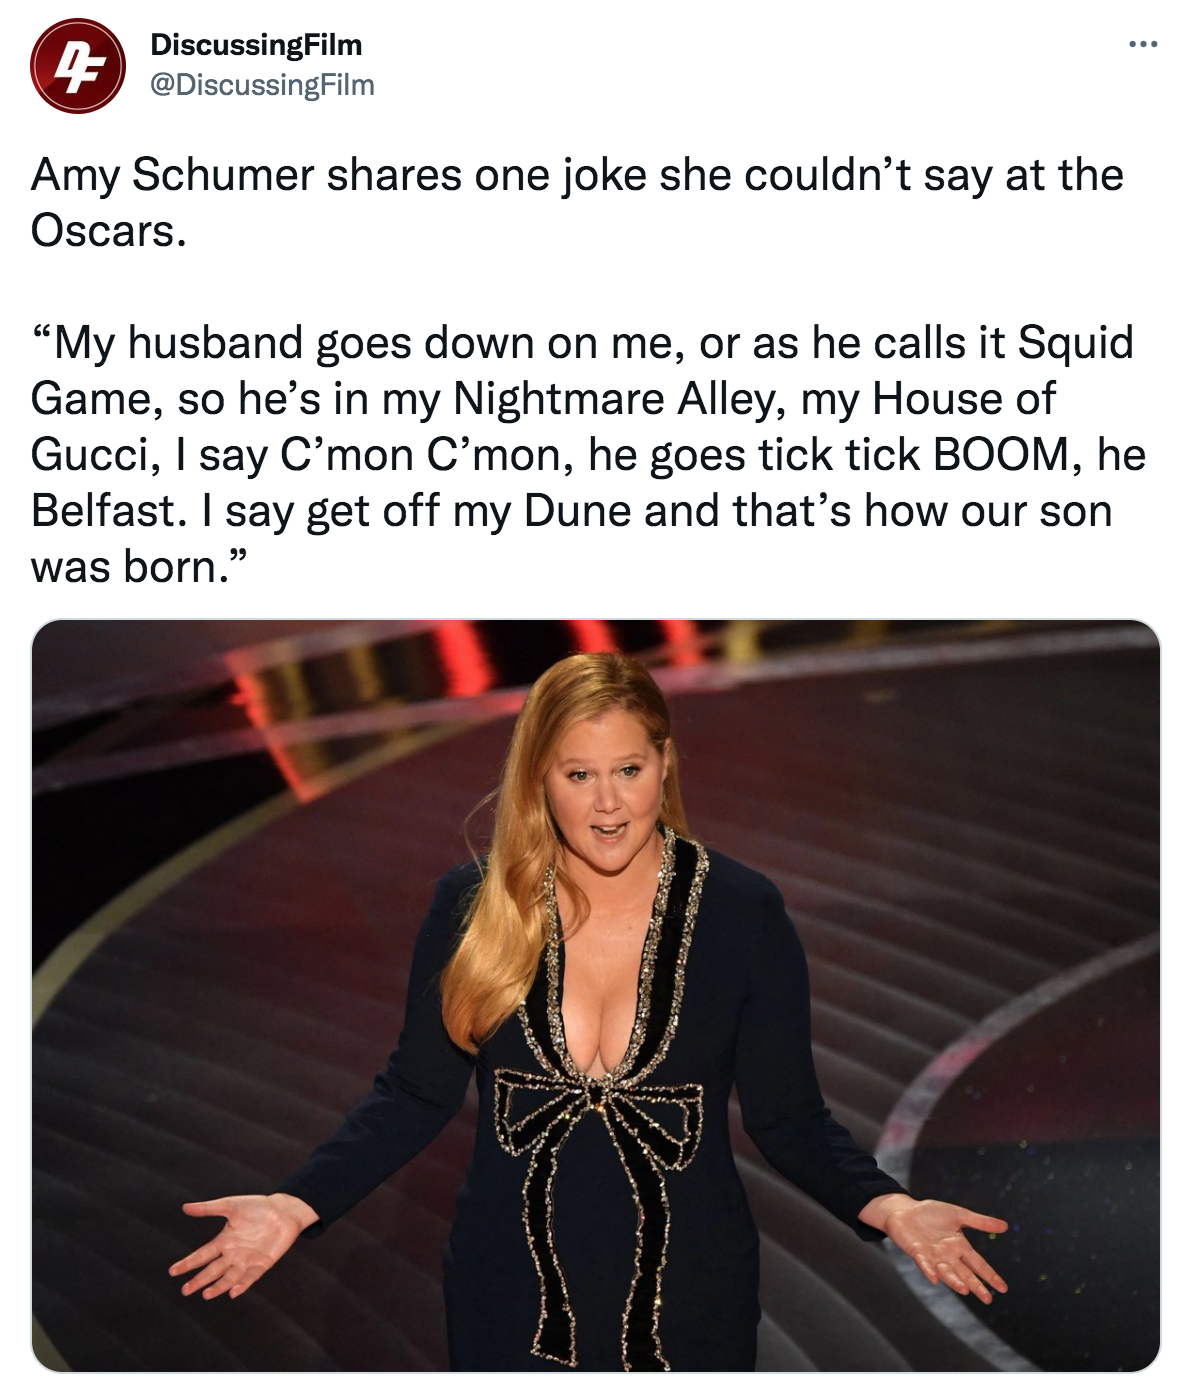 Amy Schumer Oscars Joke - -  Discussing Film .. Amy Schumer one joke she couldn't say at the Oscars. "My husband goes down on me, or as he calls it Squid Game, so he's in my Nightmare Alley, my House of Gucci, I say C'mon c'mon, he goes tick tick Boom, he